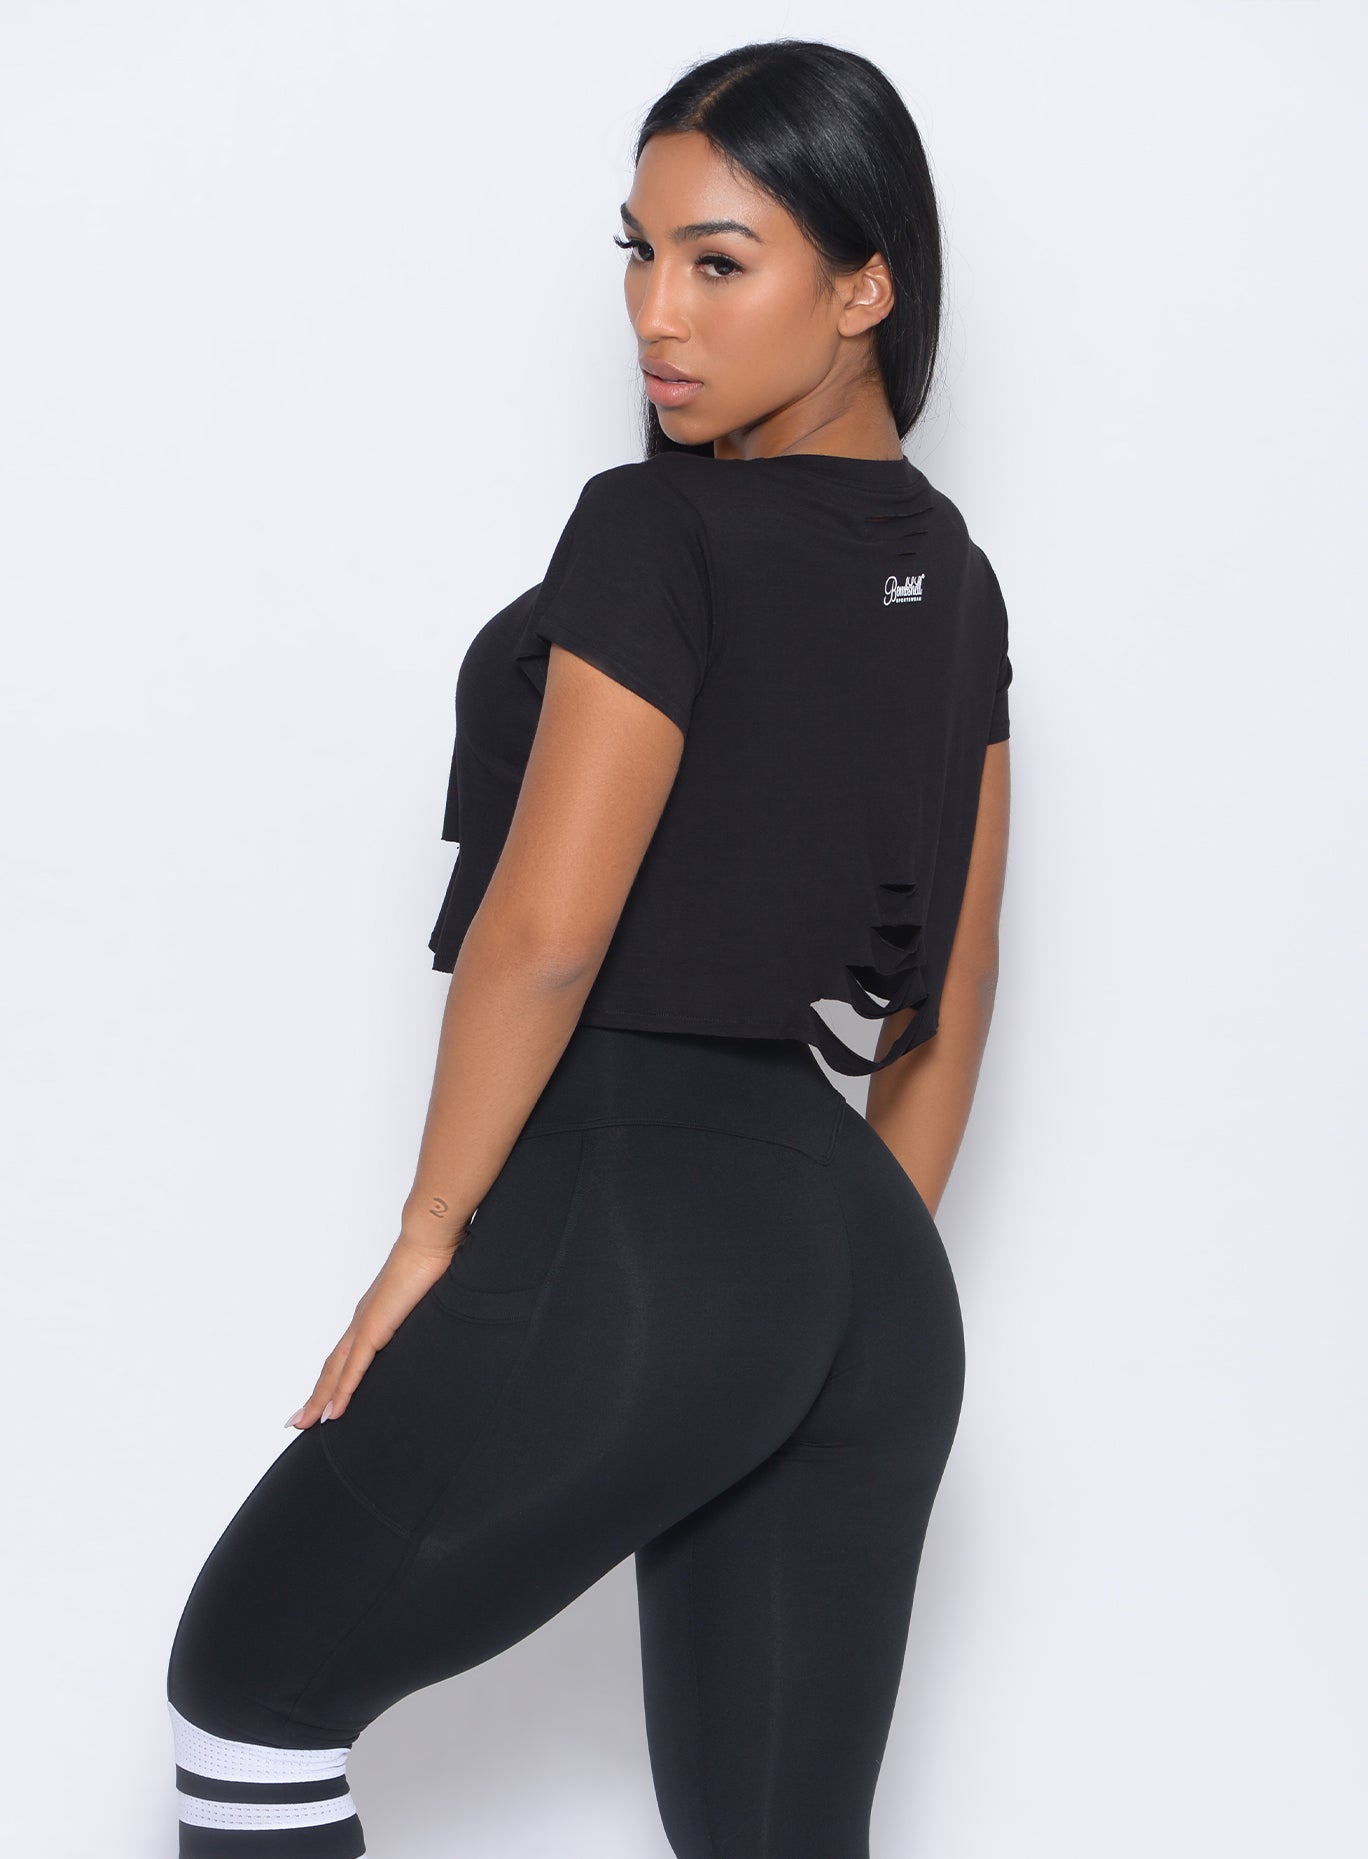 Left side view of the model in our black shredded tee and a matching leggings